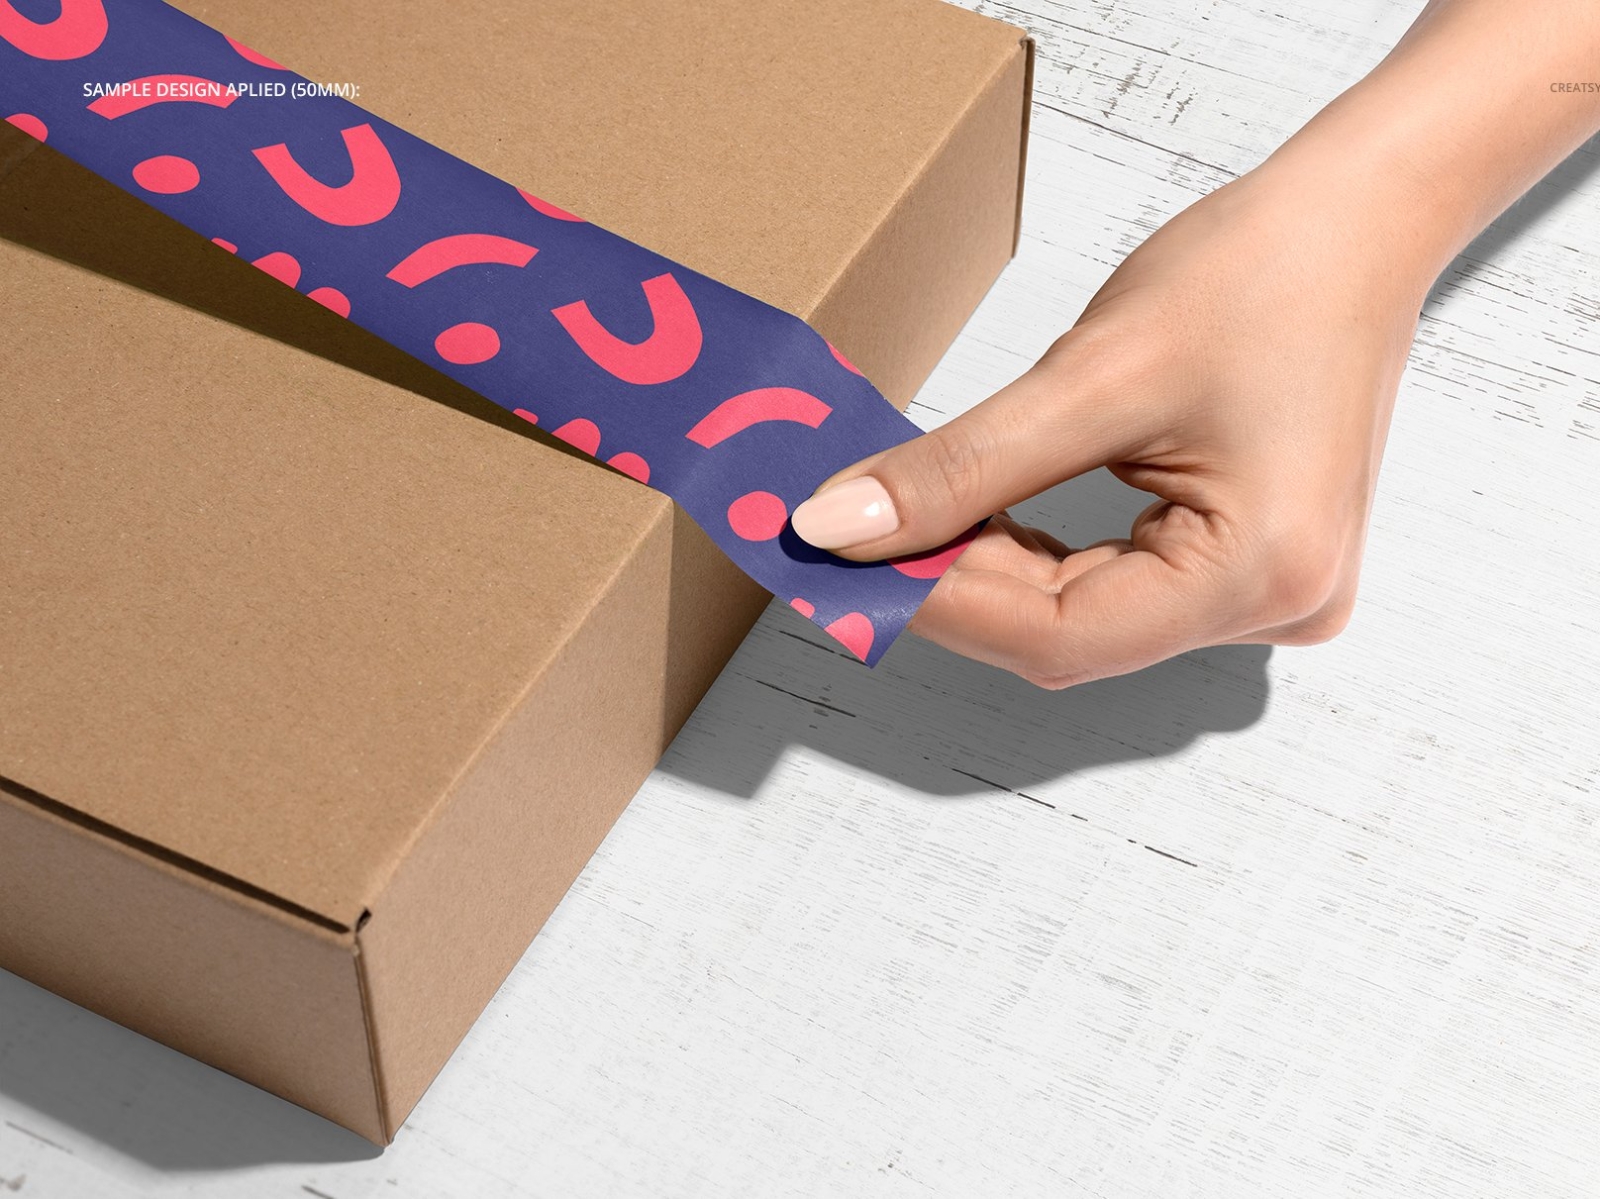 Download Noissue Packing Tape Mockup Set by Mockup5 on Dribbble